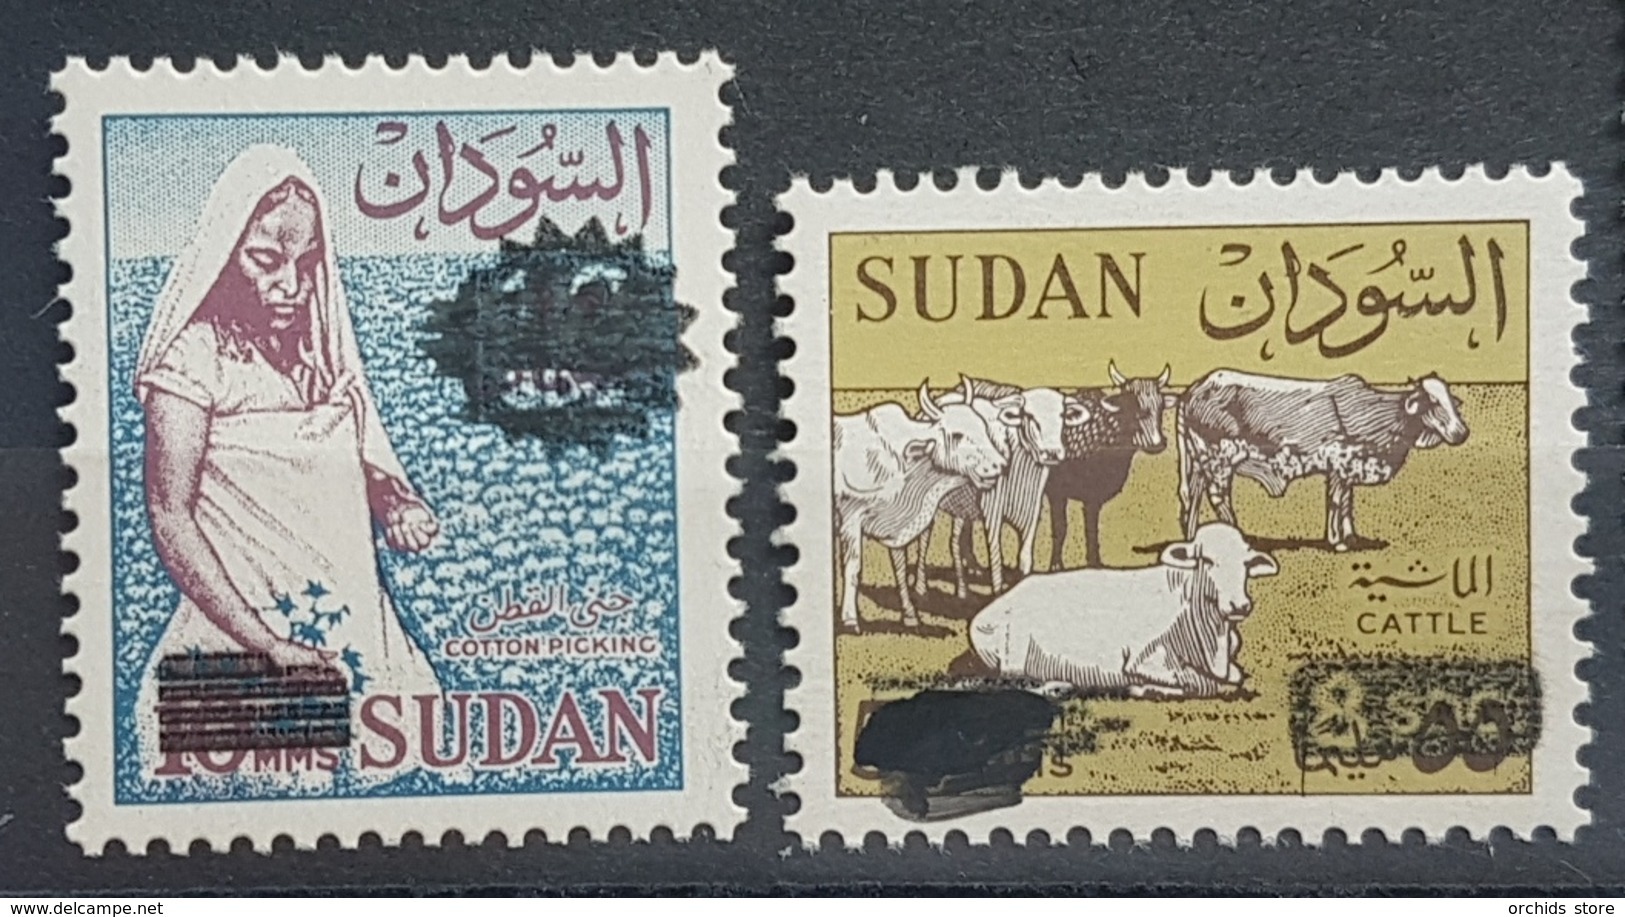 HX - Sudan 2017 Compleet Set 2v. MNH - Previous Issues Surcharged New Values - Sudan (1954-...)